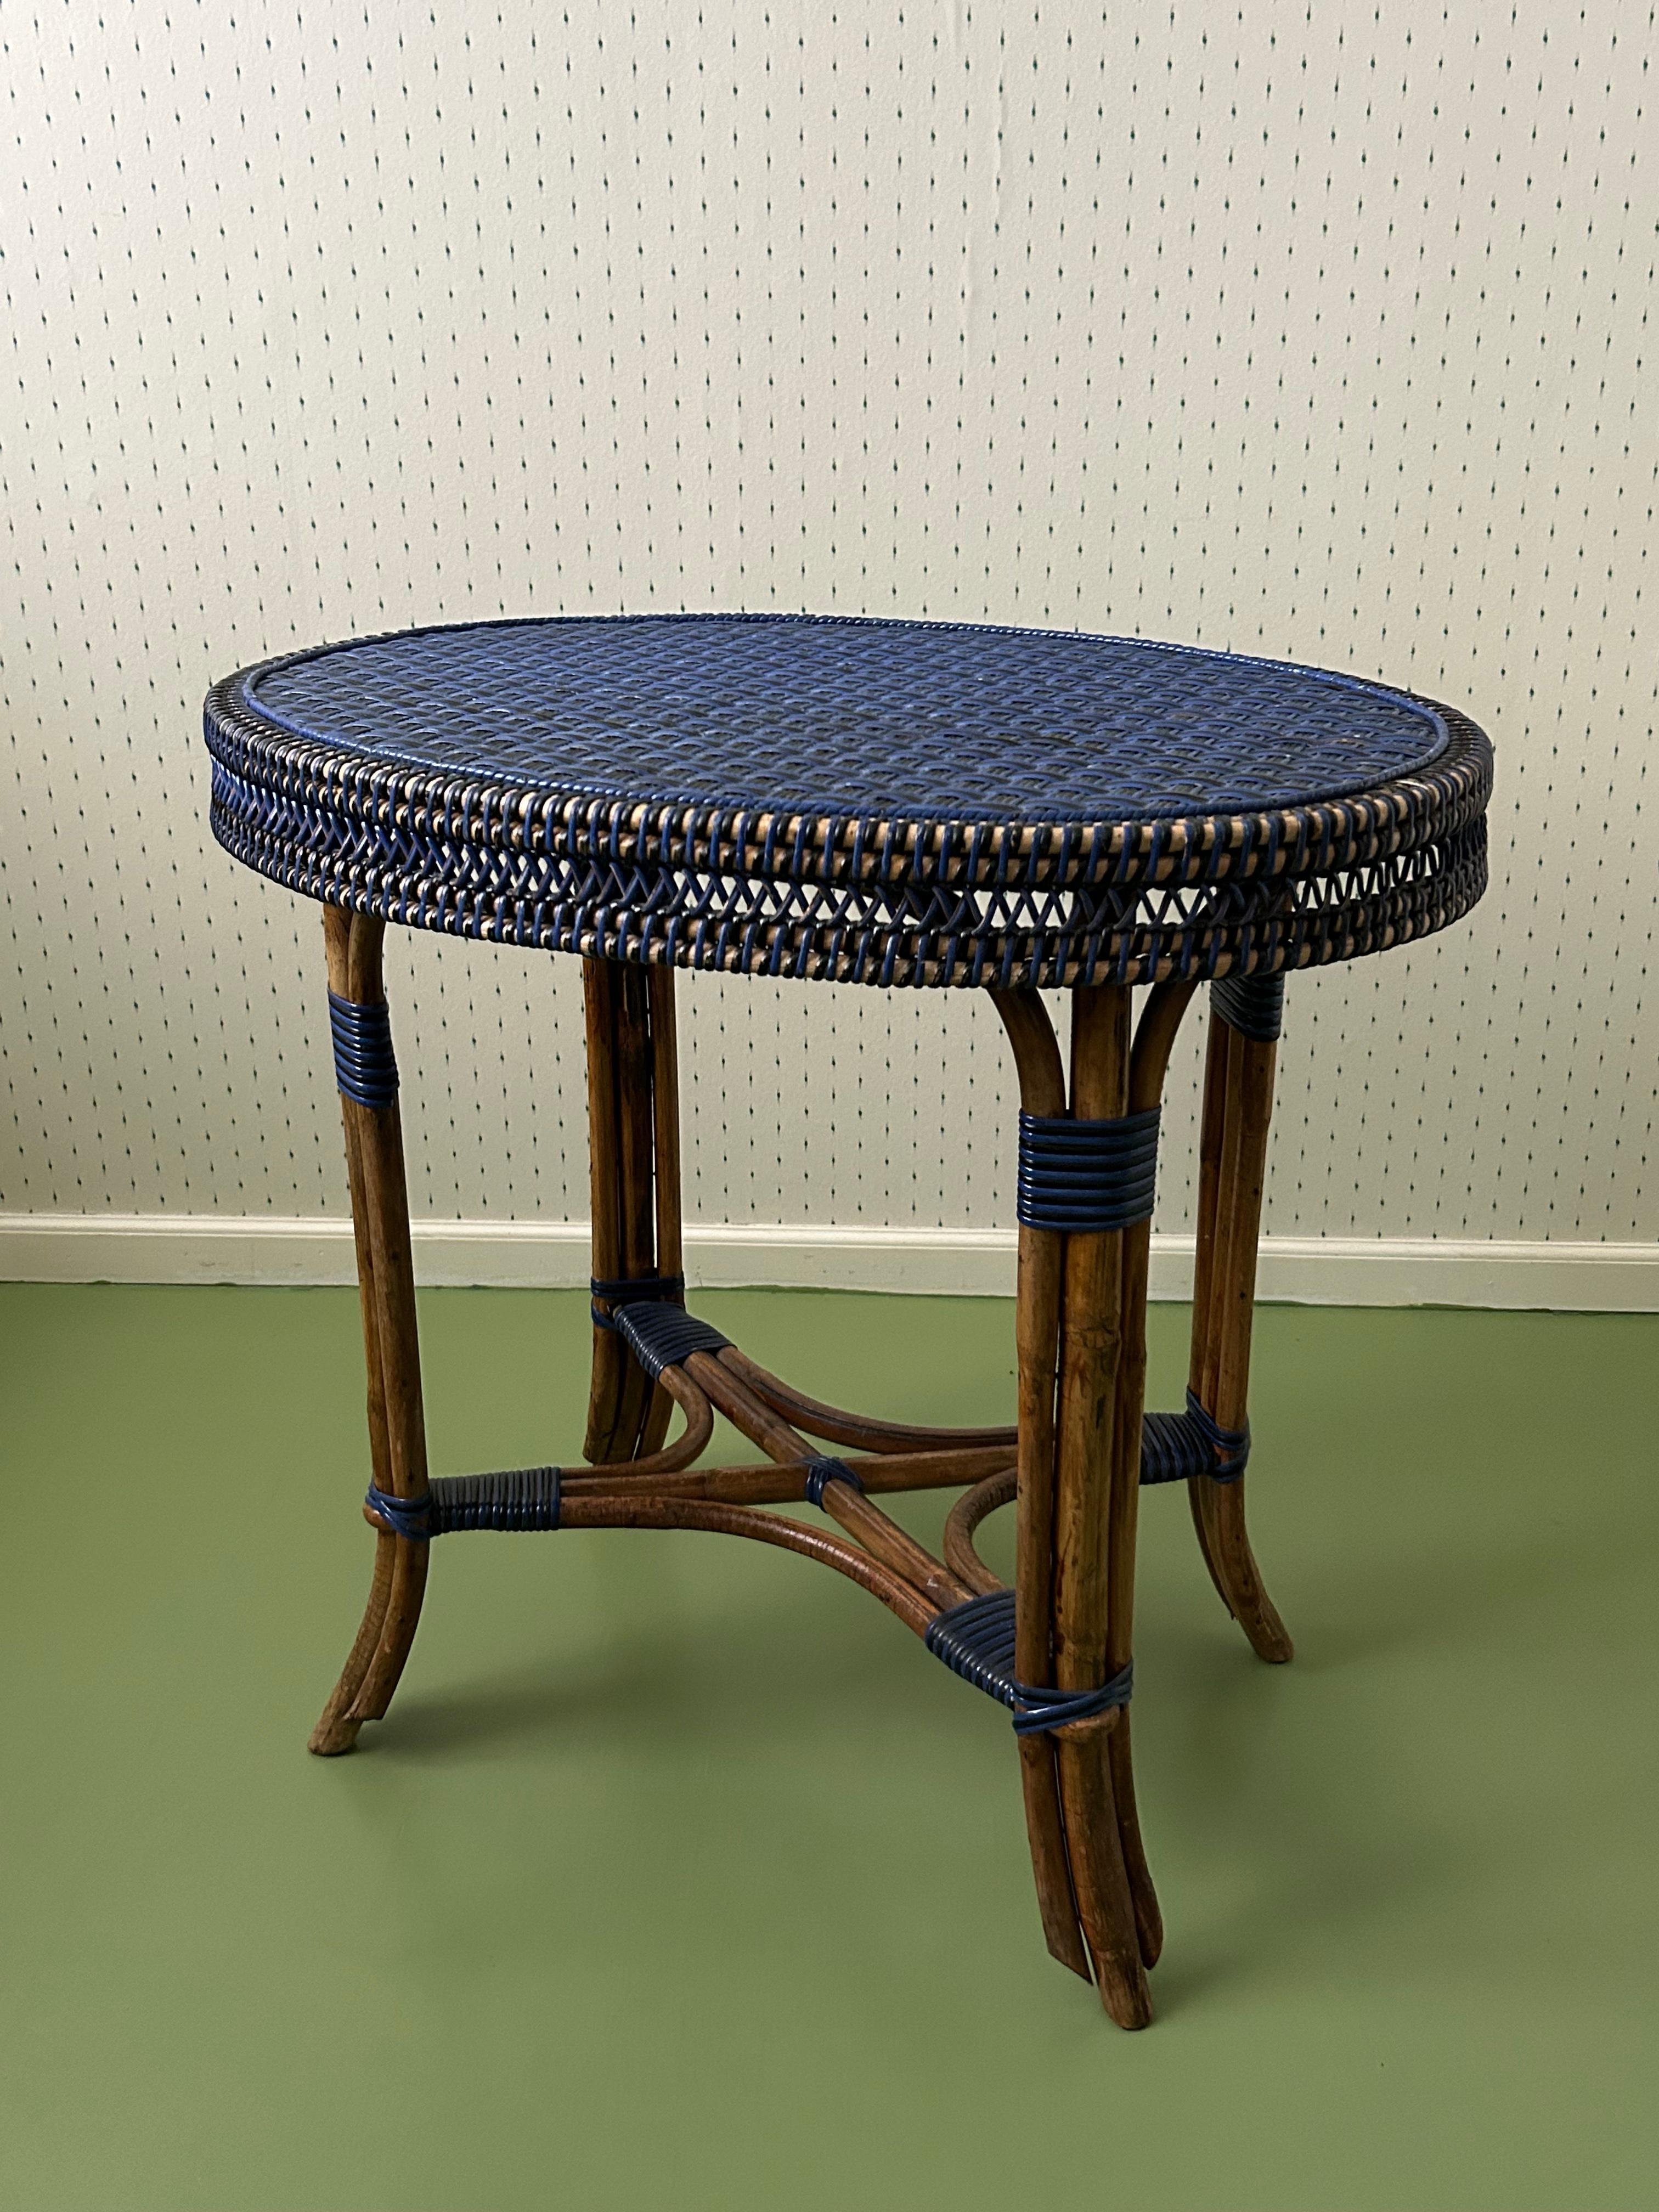 Vintage Rattan Table in Black and Blue, France, Early 20th Century For Sale 1